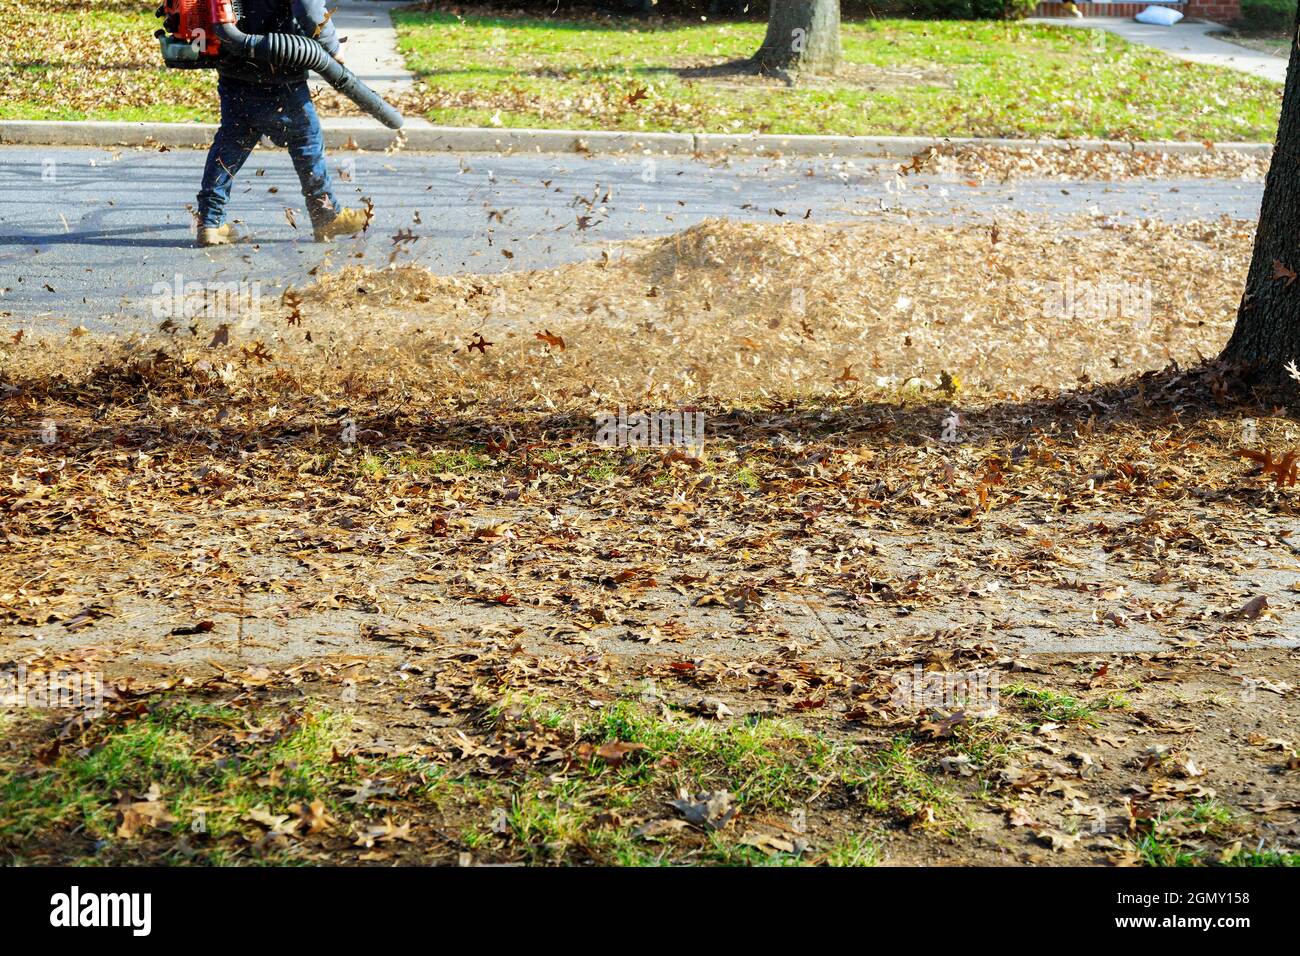 Blowing off leaves falling from trees in man using a blower, a cleaner works Stock Photo